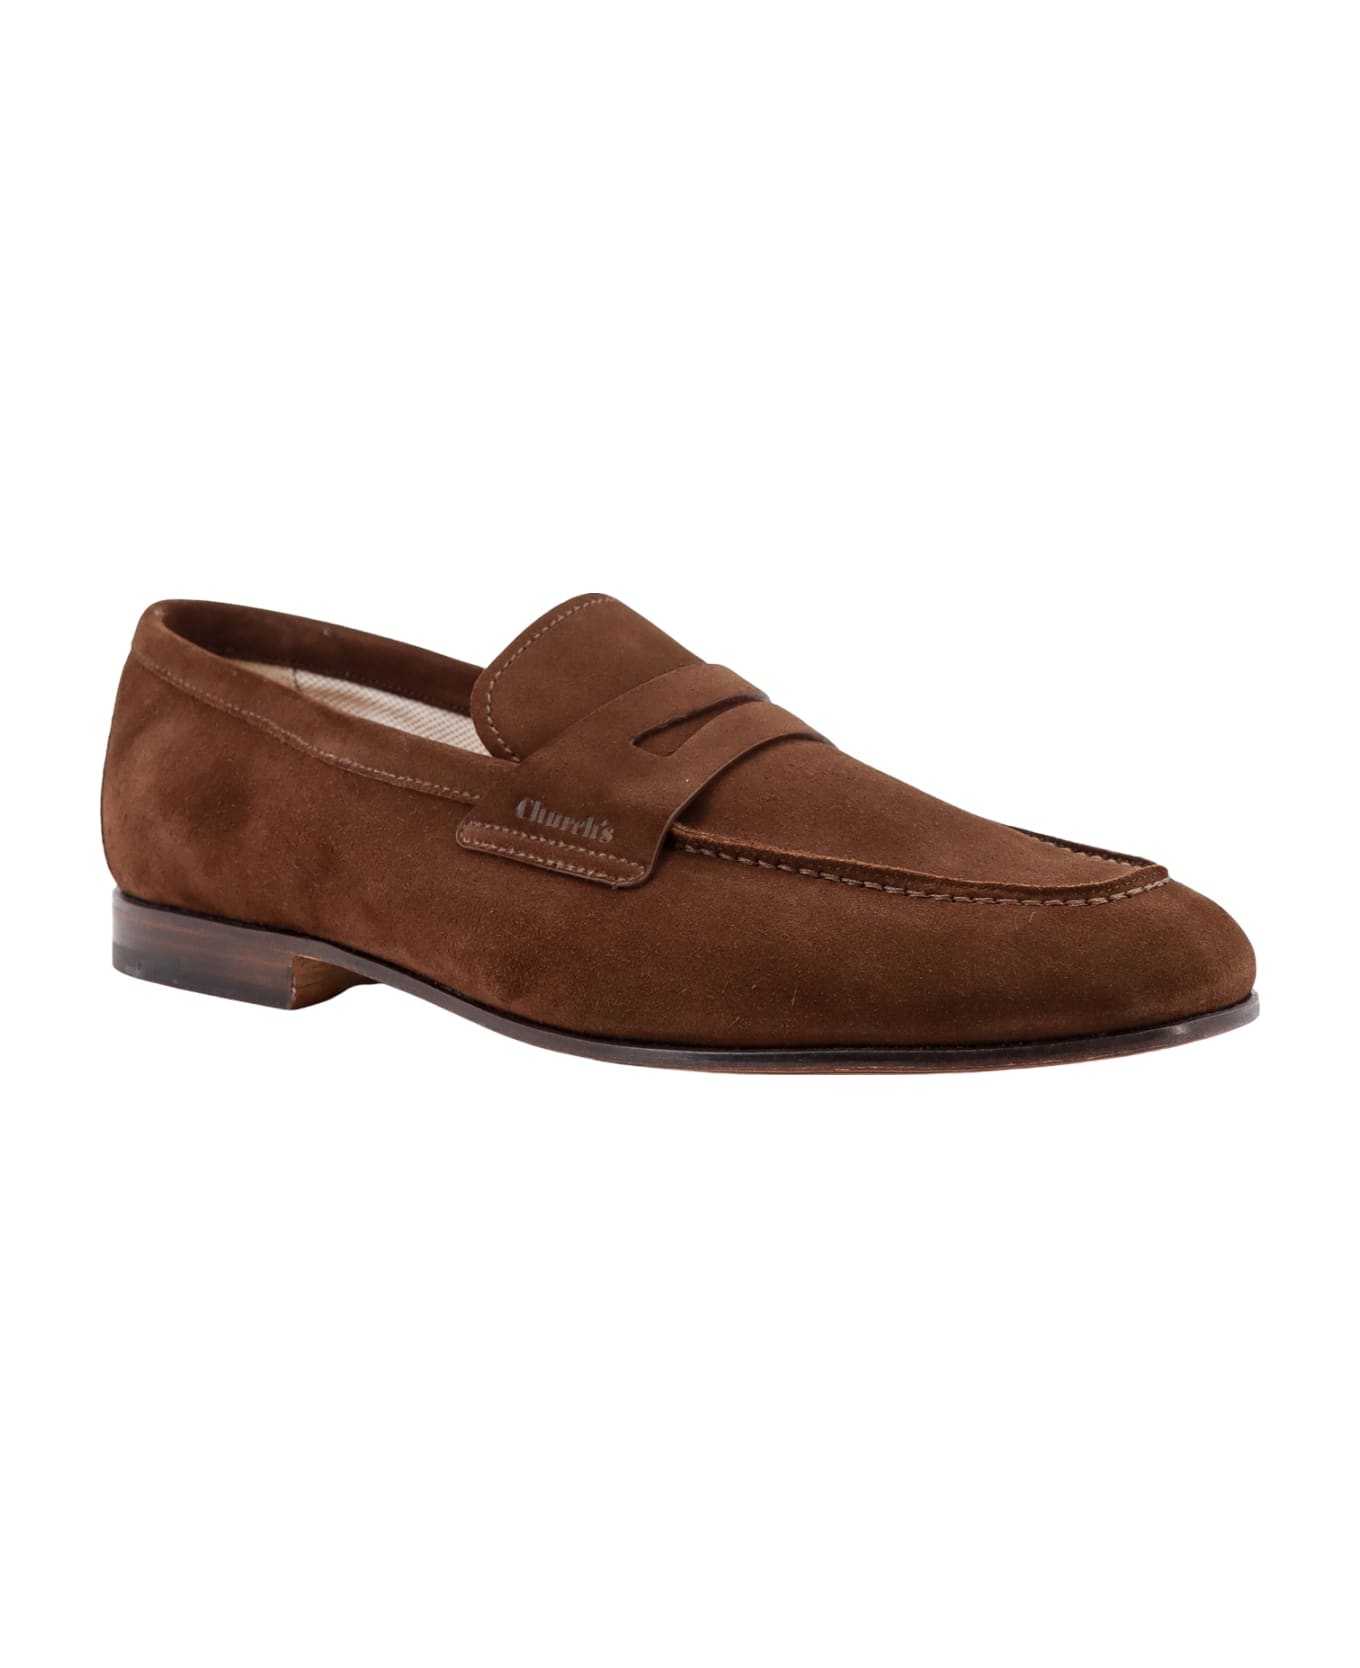 Church's Loafer - Brown